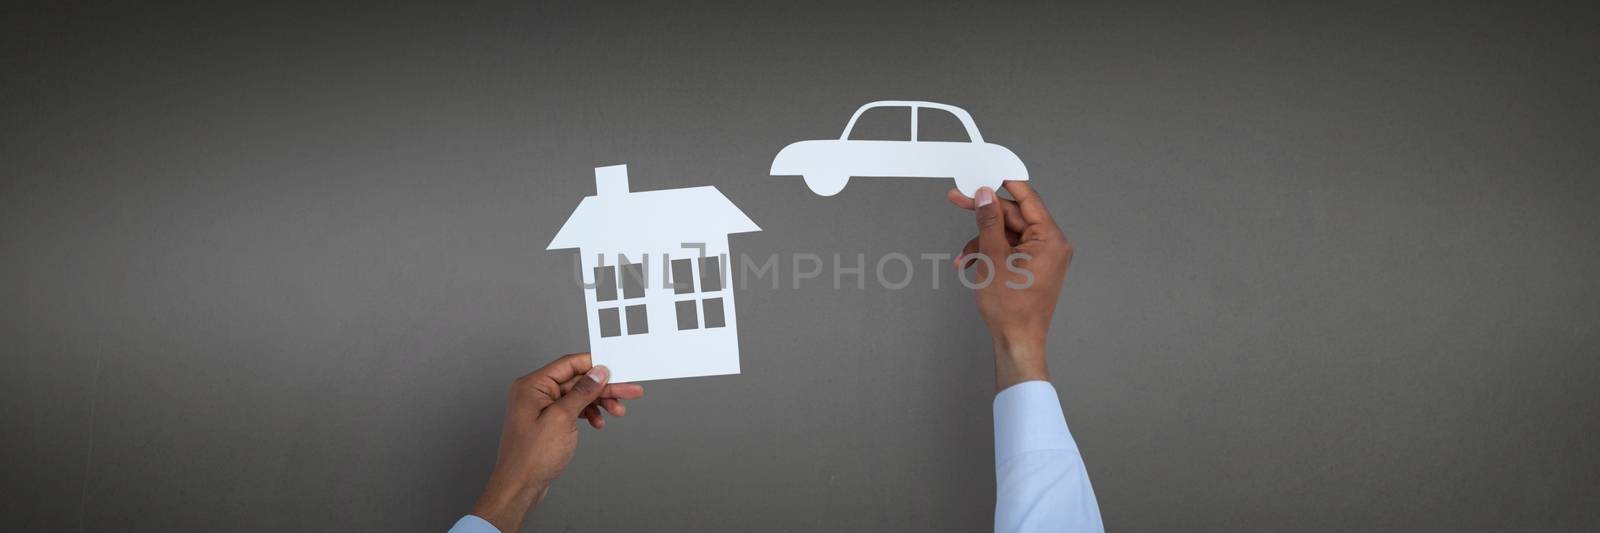 Car and house insurance concept against grey background by Wavebreakmedia